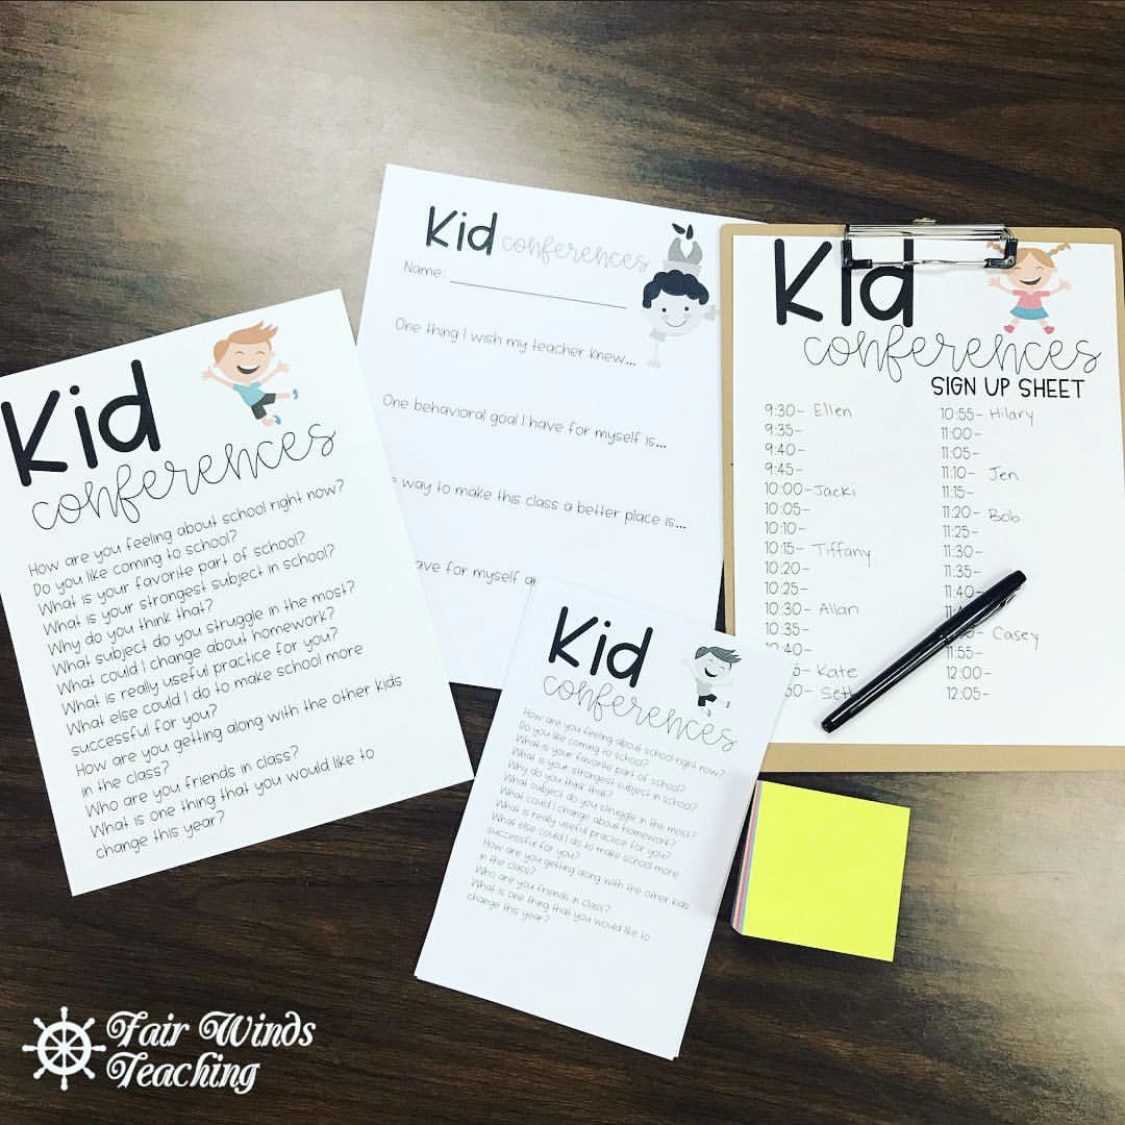 kid conference resources